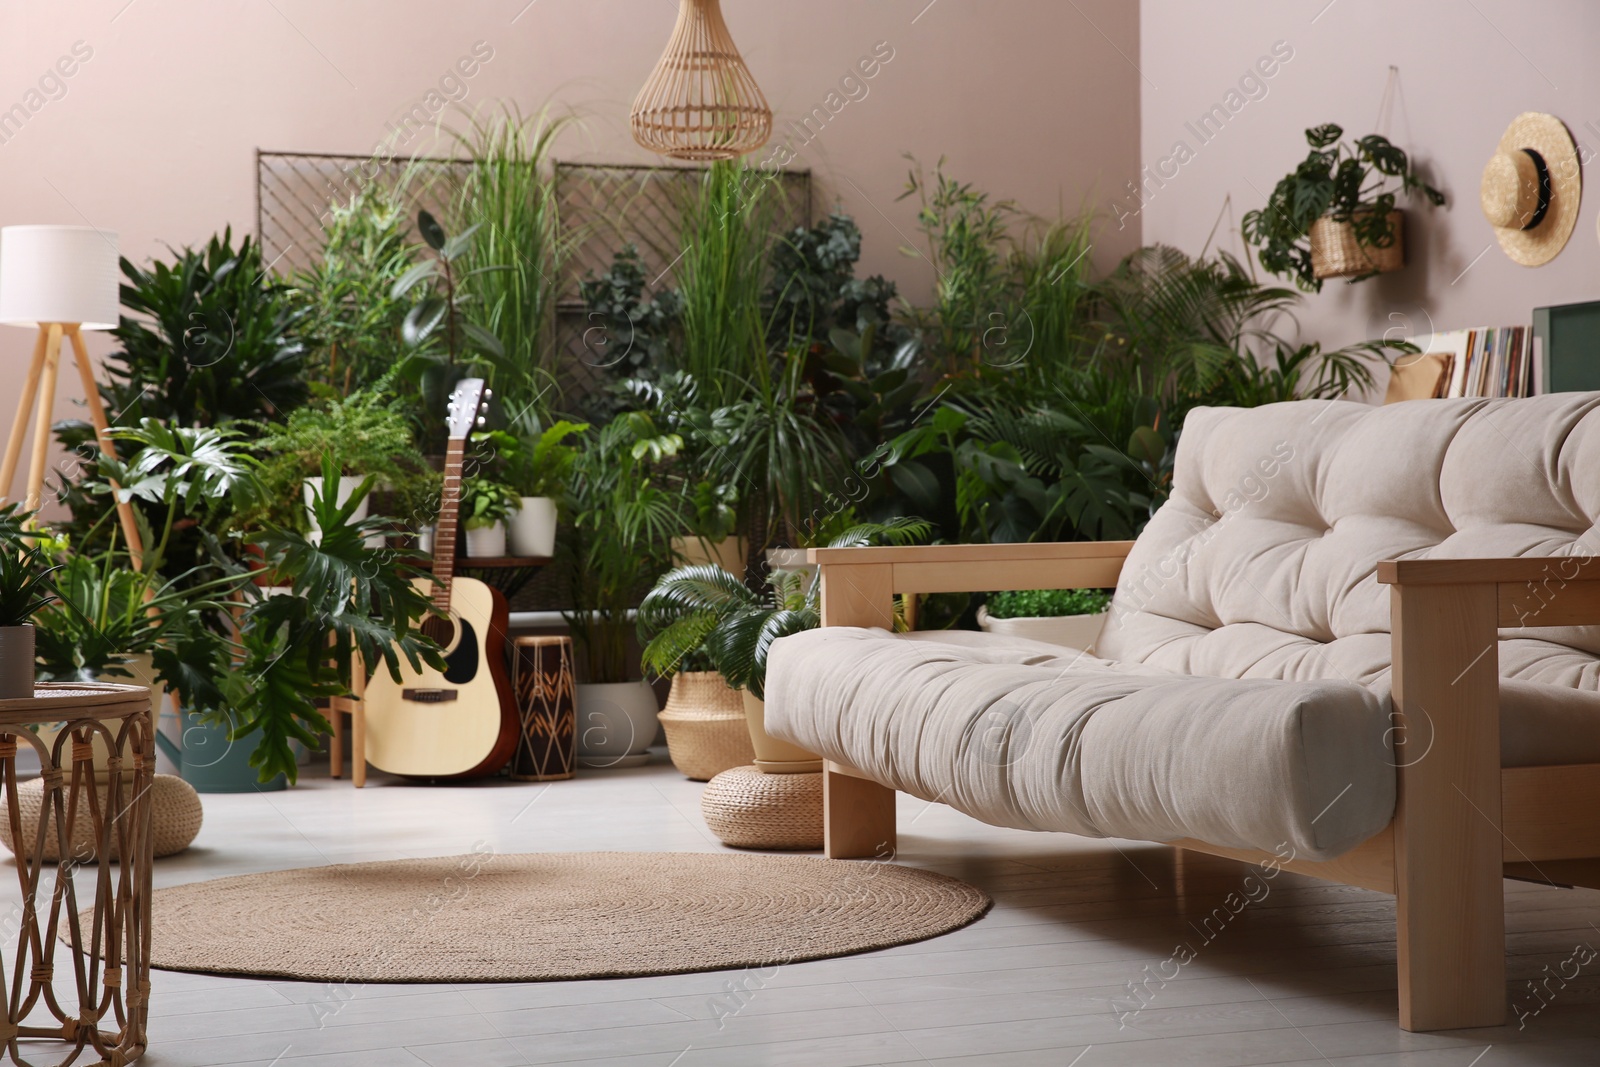 Photo of Living room interior with stylish furniture and different houseplants